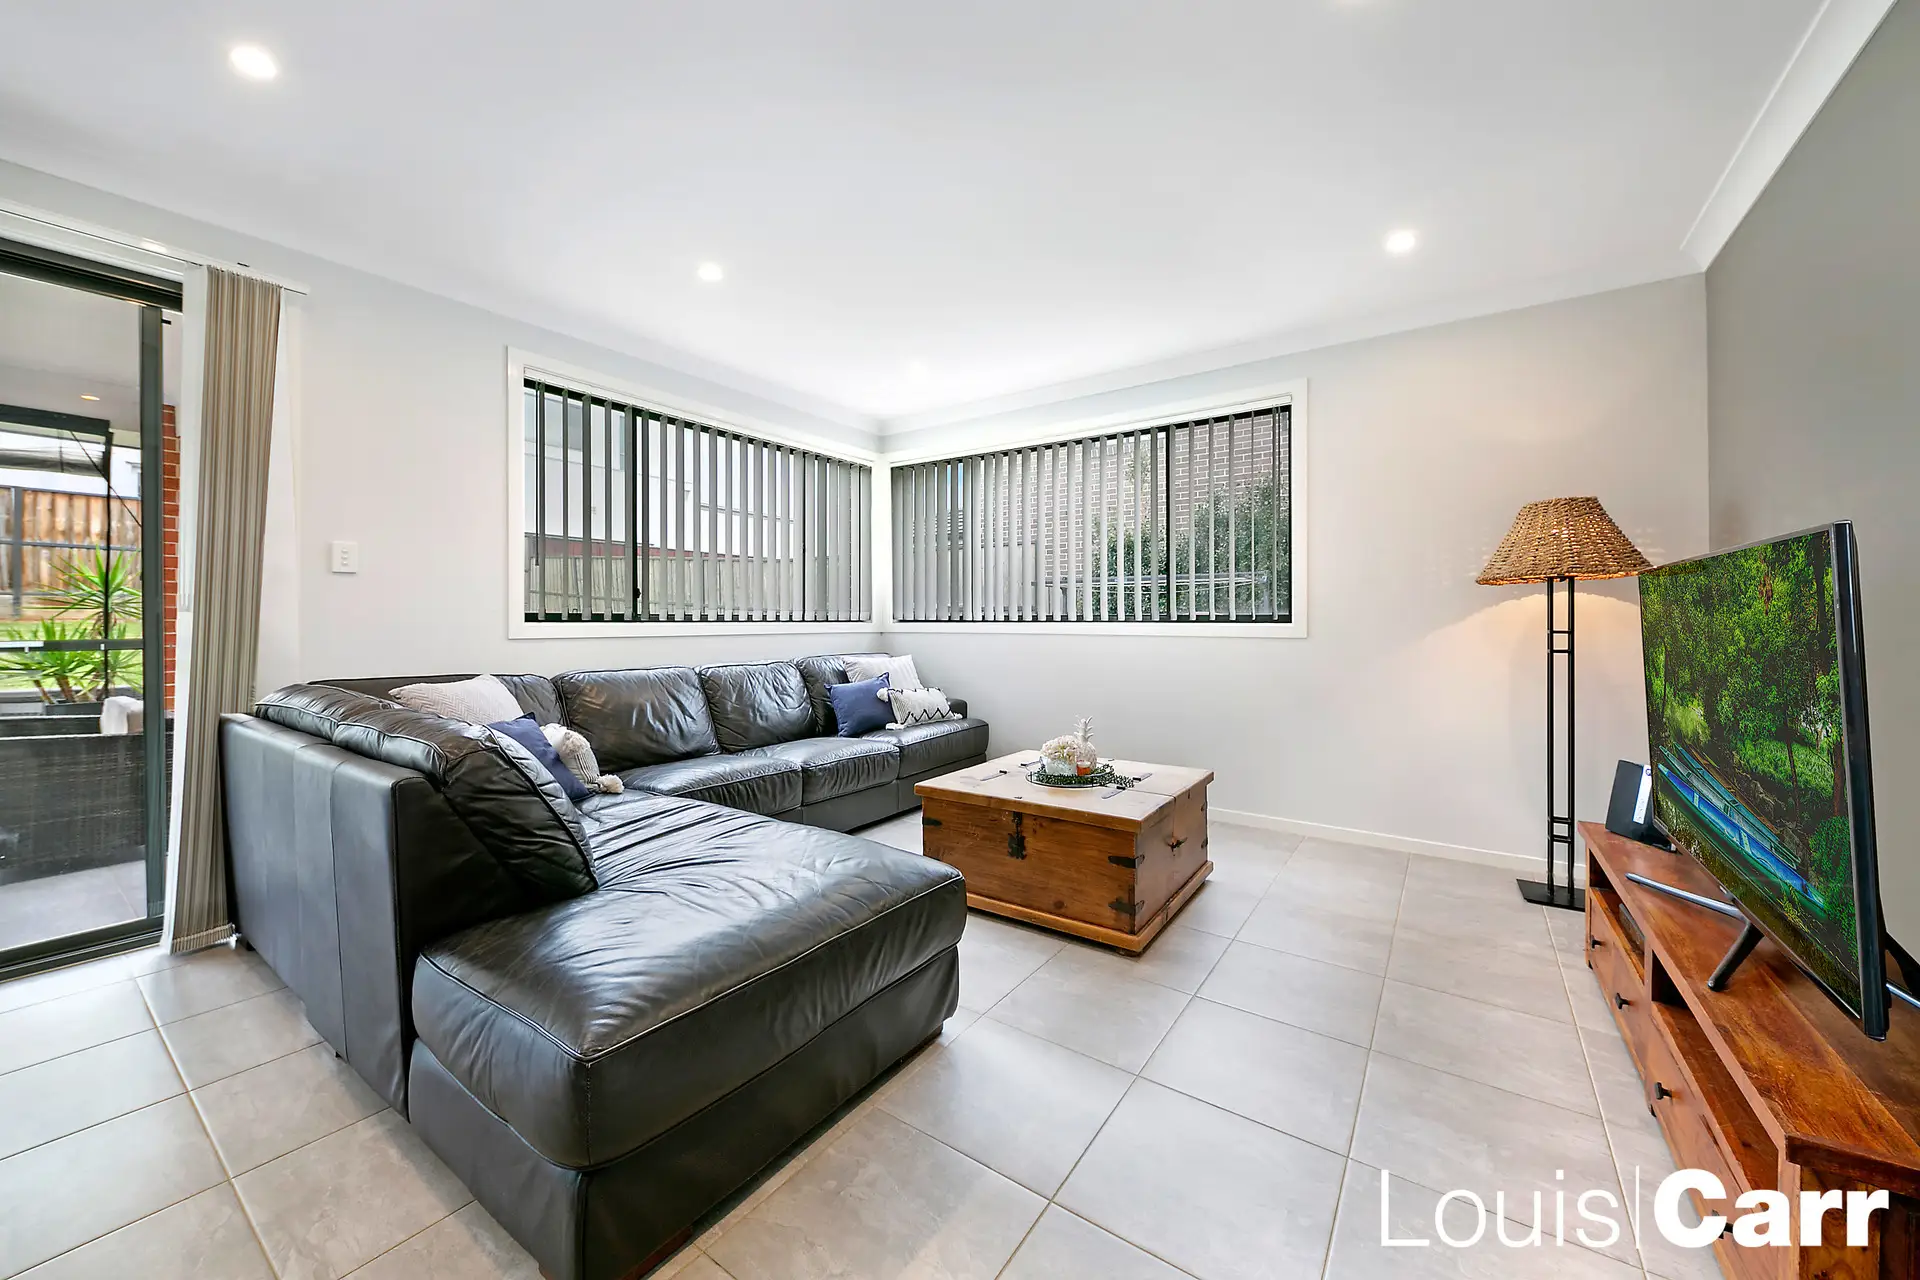 Photo #5: 17 Florence Avenue, Kellyville - Sold by Louis Carr Real Estate